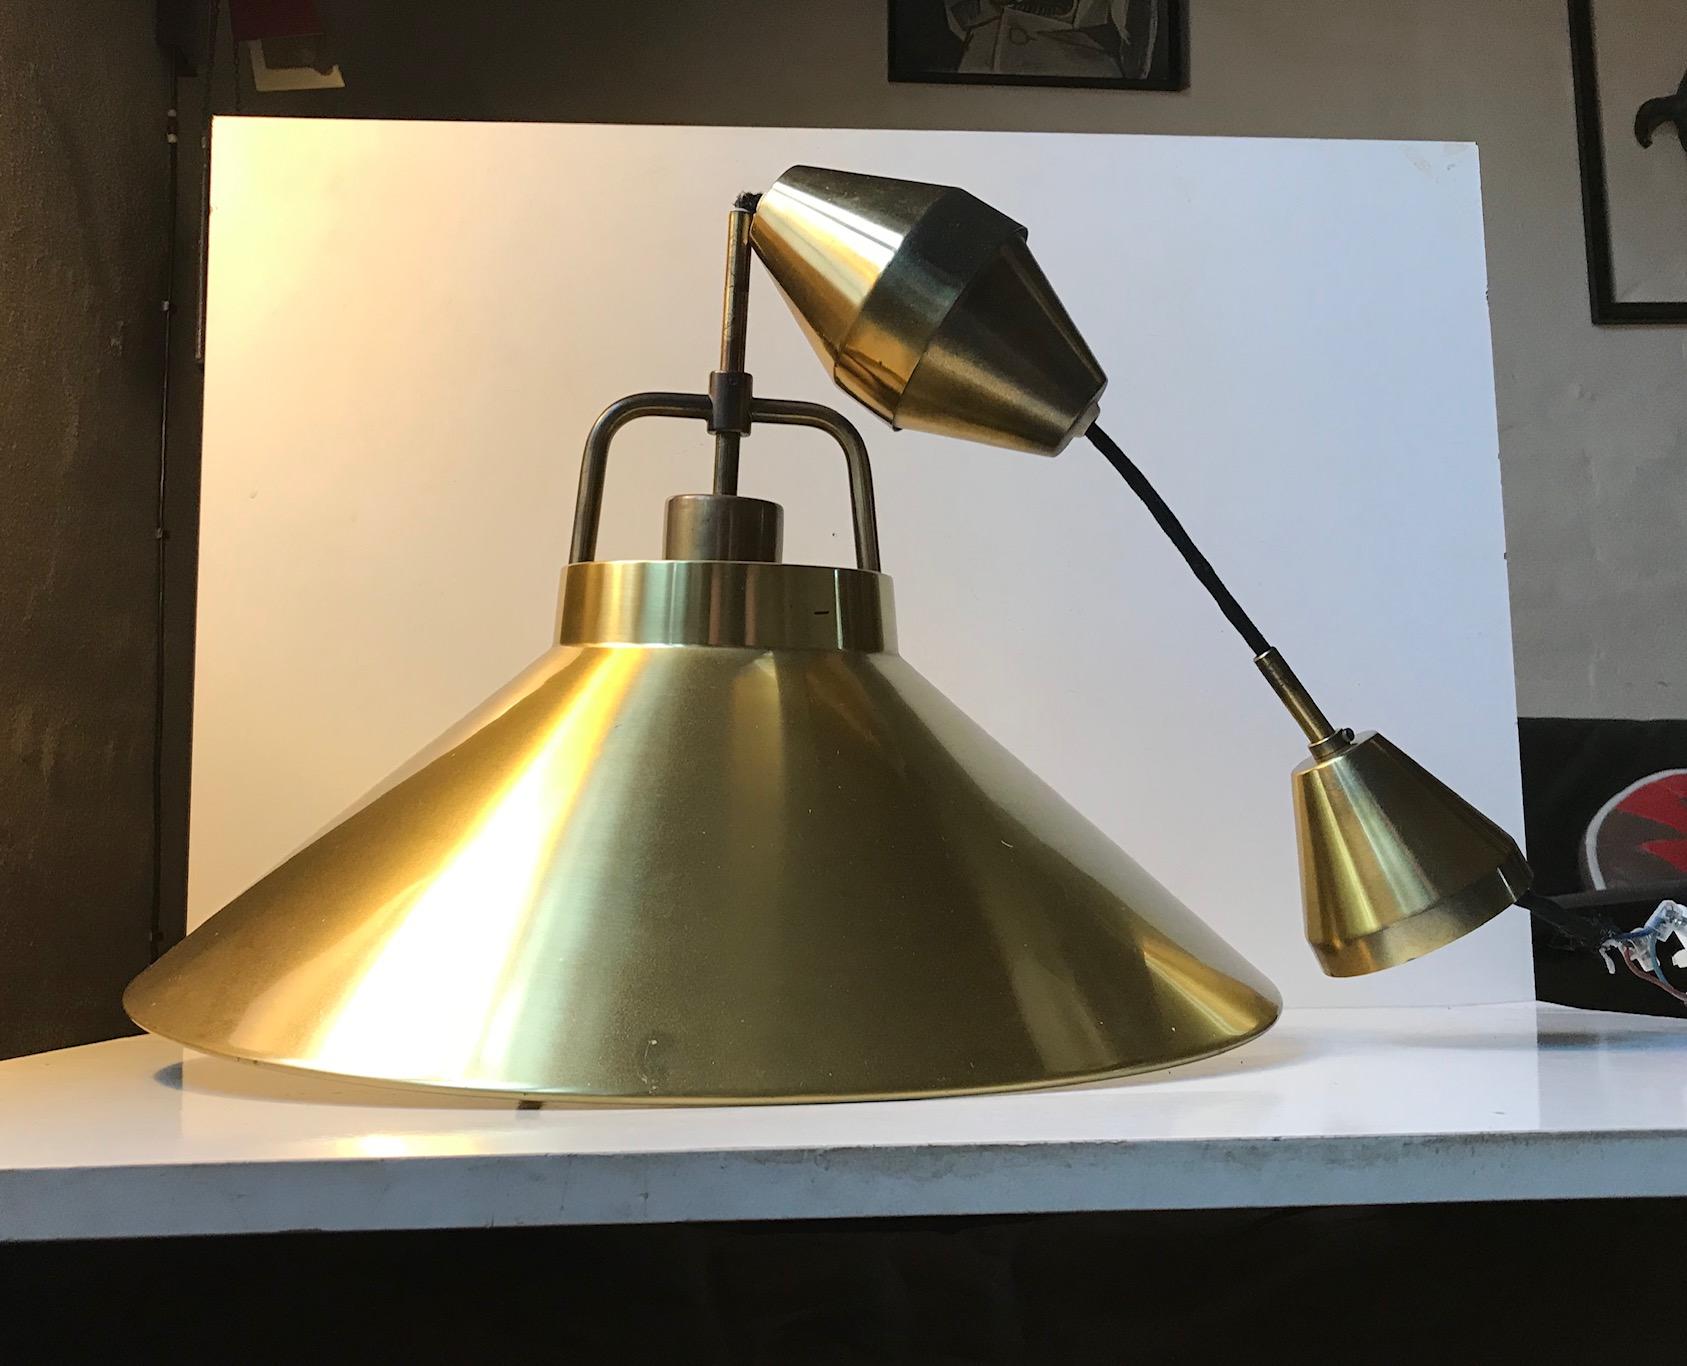 - Solid brass pendant light designed by Fritz Schlegel
- Manufactured by Lyfa in Denmark in the mid-1960s
- Brass mounting bracket with adjustable height and original matching brass canopy.
- Original porcelain fitting
- Model P 295.
 